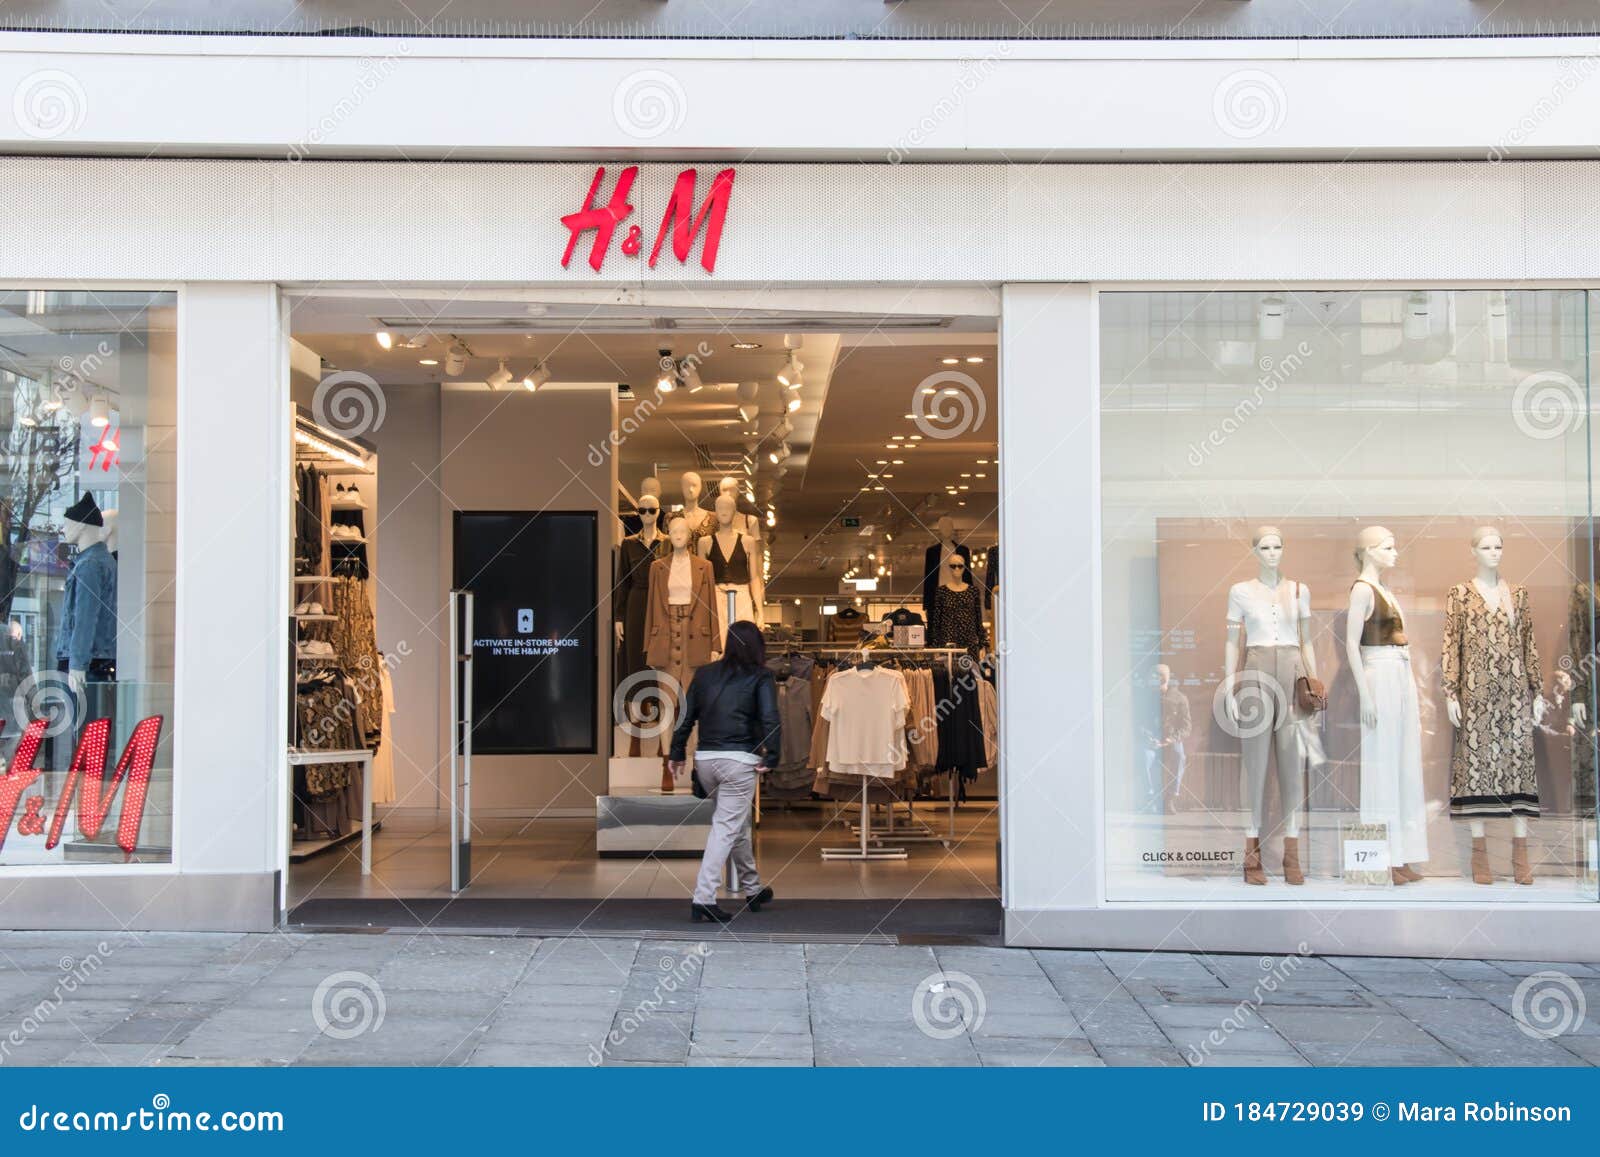 Exterior of H & M Fashion Clothing Shop Showing Company Name, Logo